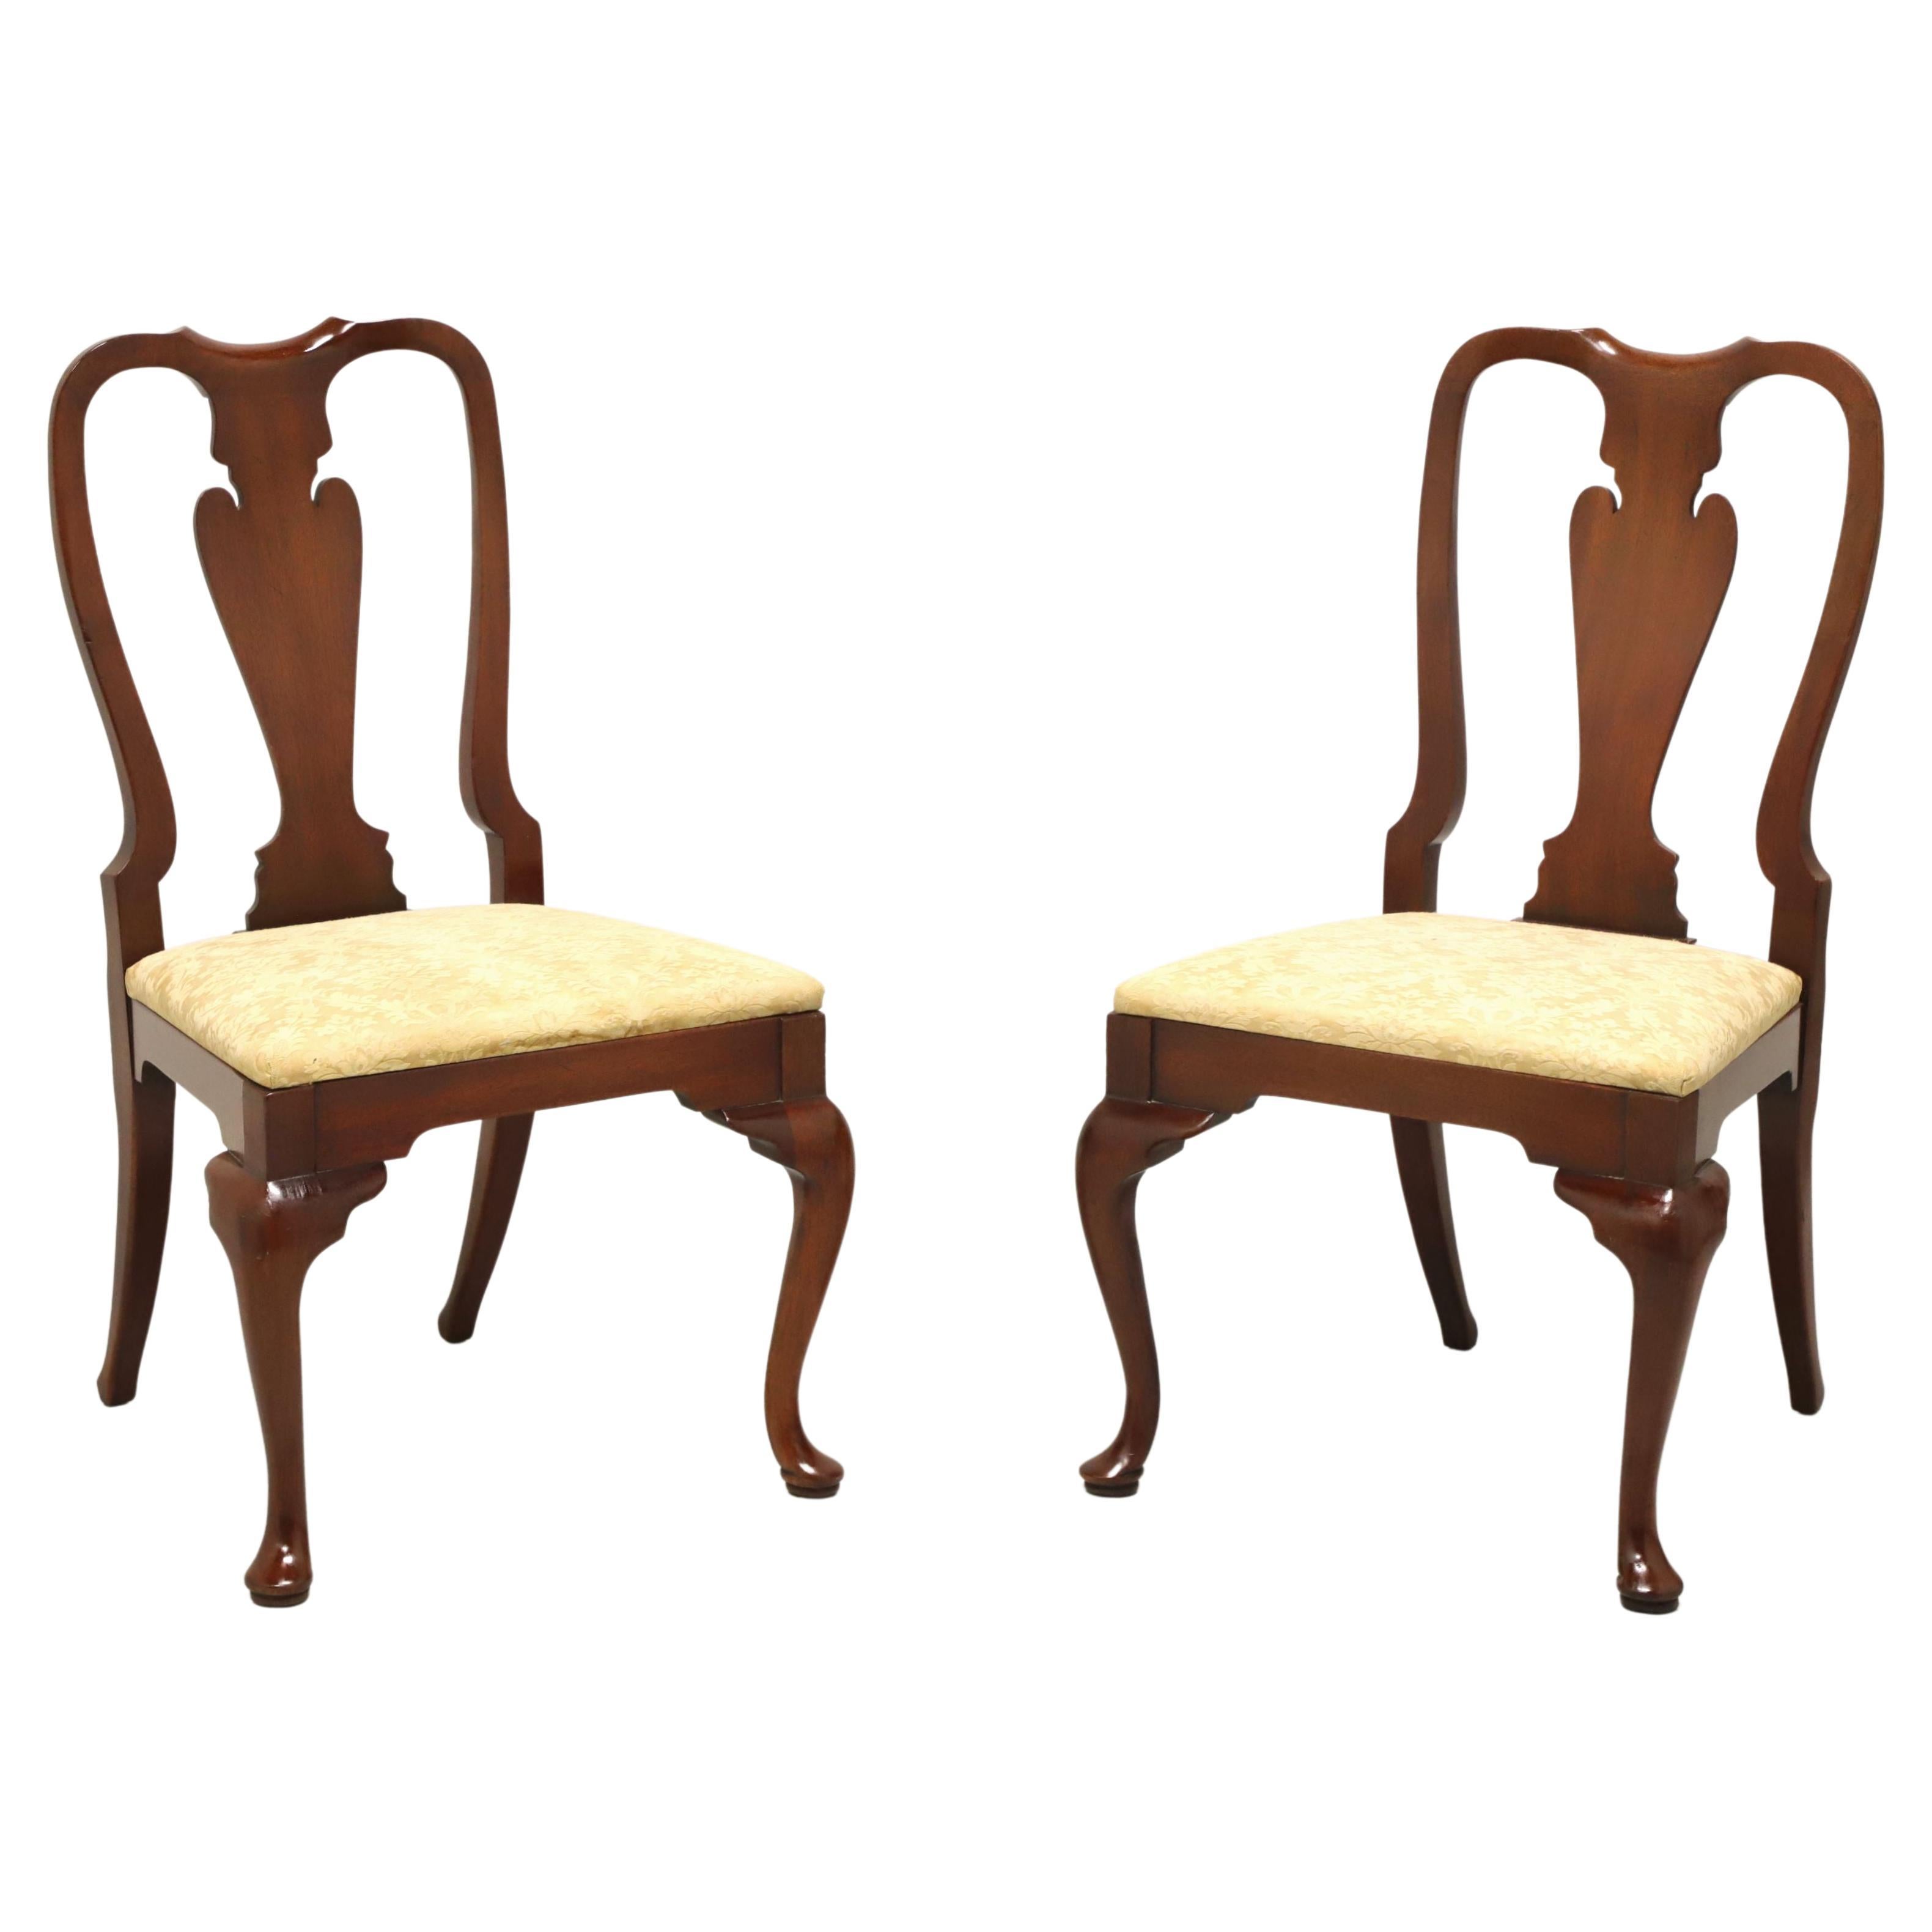 HICKORY CHAIR Amber Mahogany Queen Anne Dining Side Chairs - Pair B